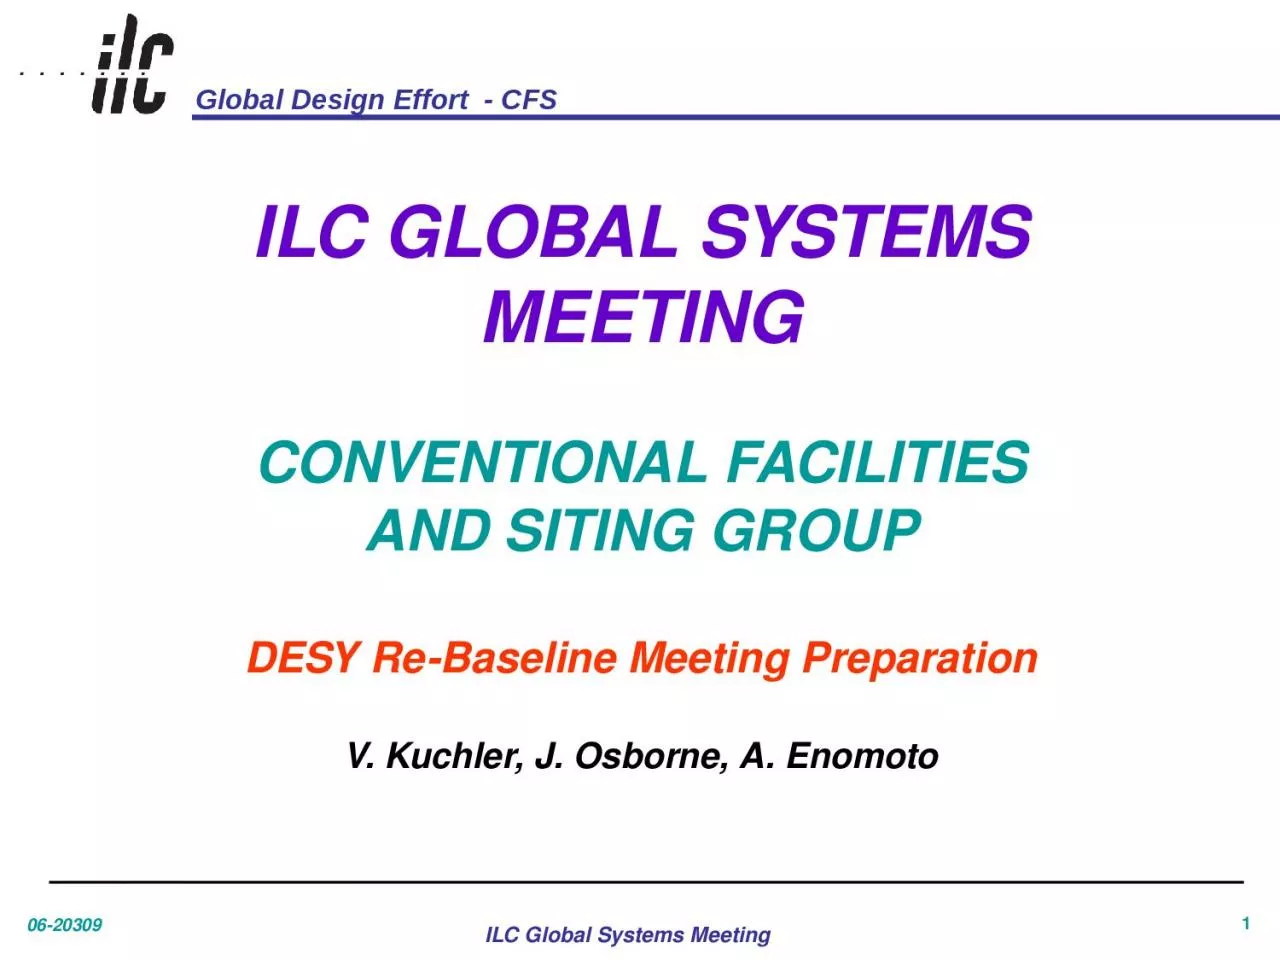 1 ILC GLOBAL SYSTEMS MEETING